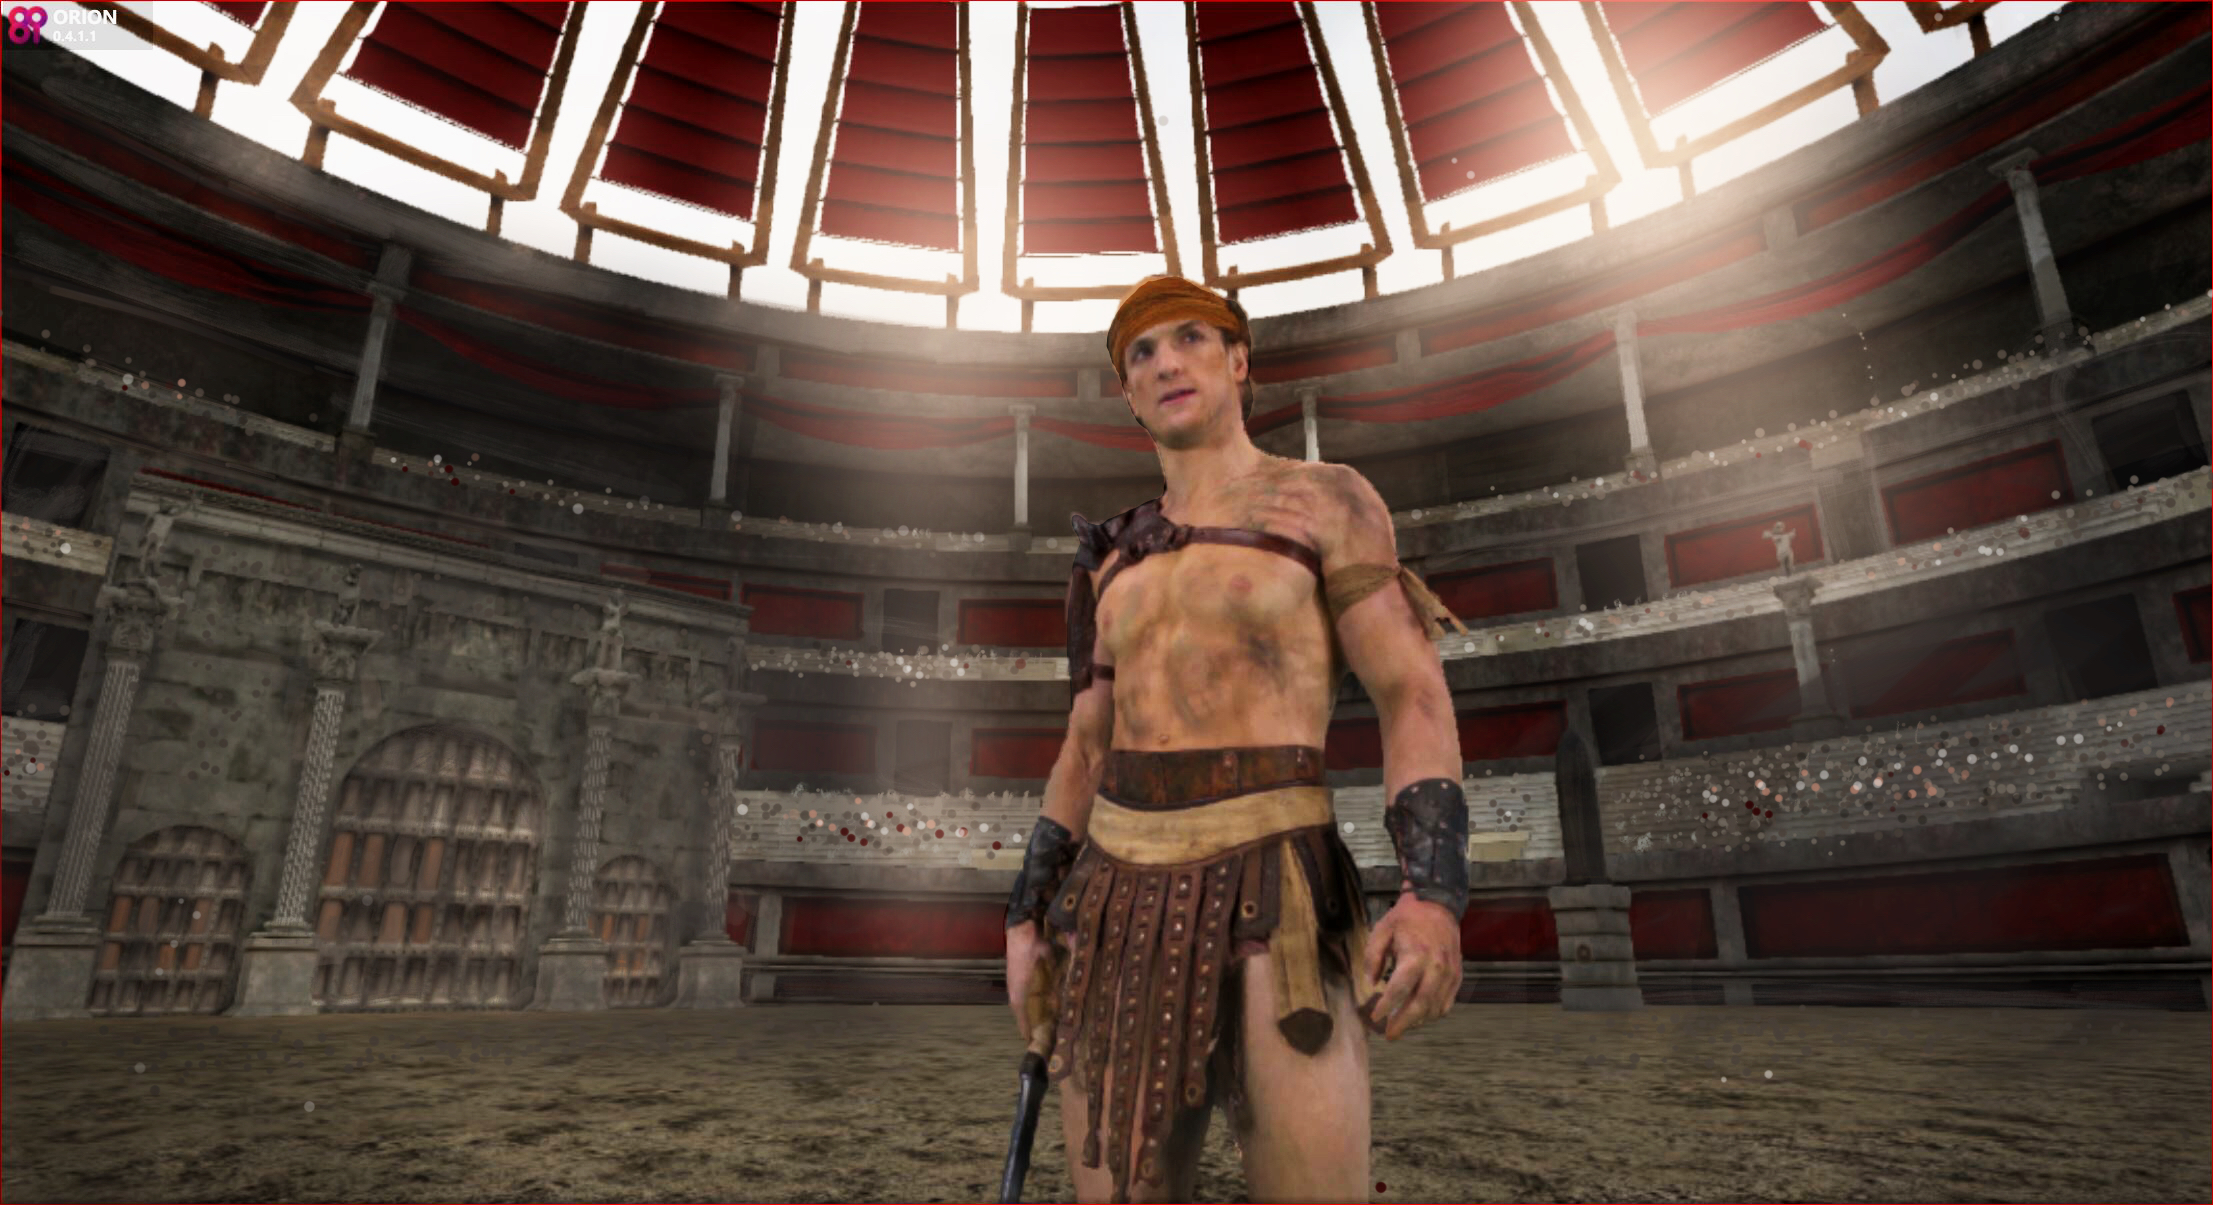 Logan Paul as a gladiator in the Colosseum. A scene from #100humans VR project, premiering at the 2016 Sundance Film Festival